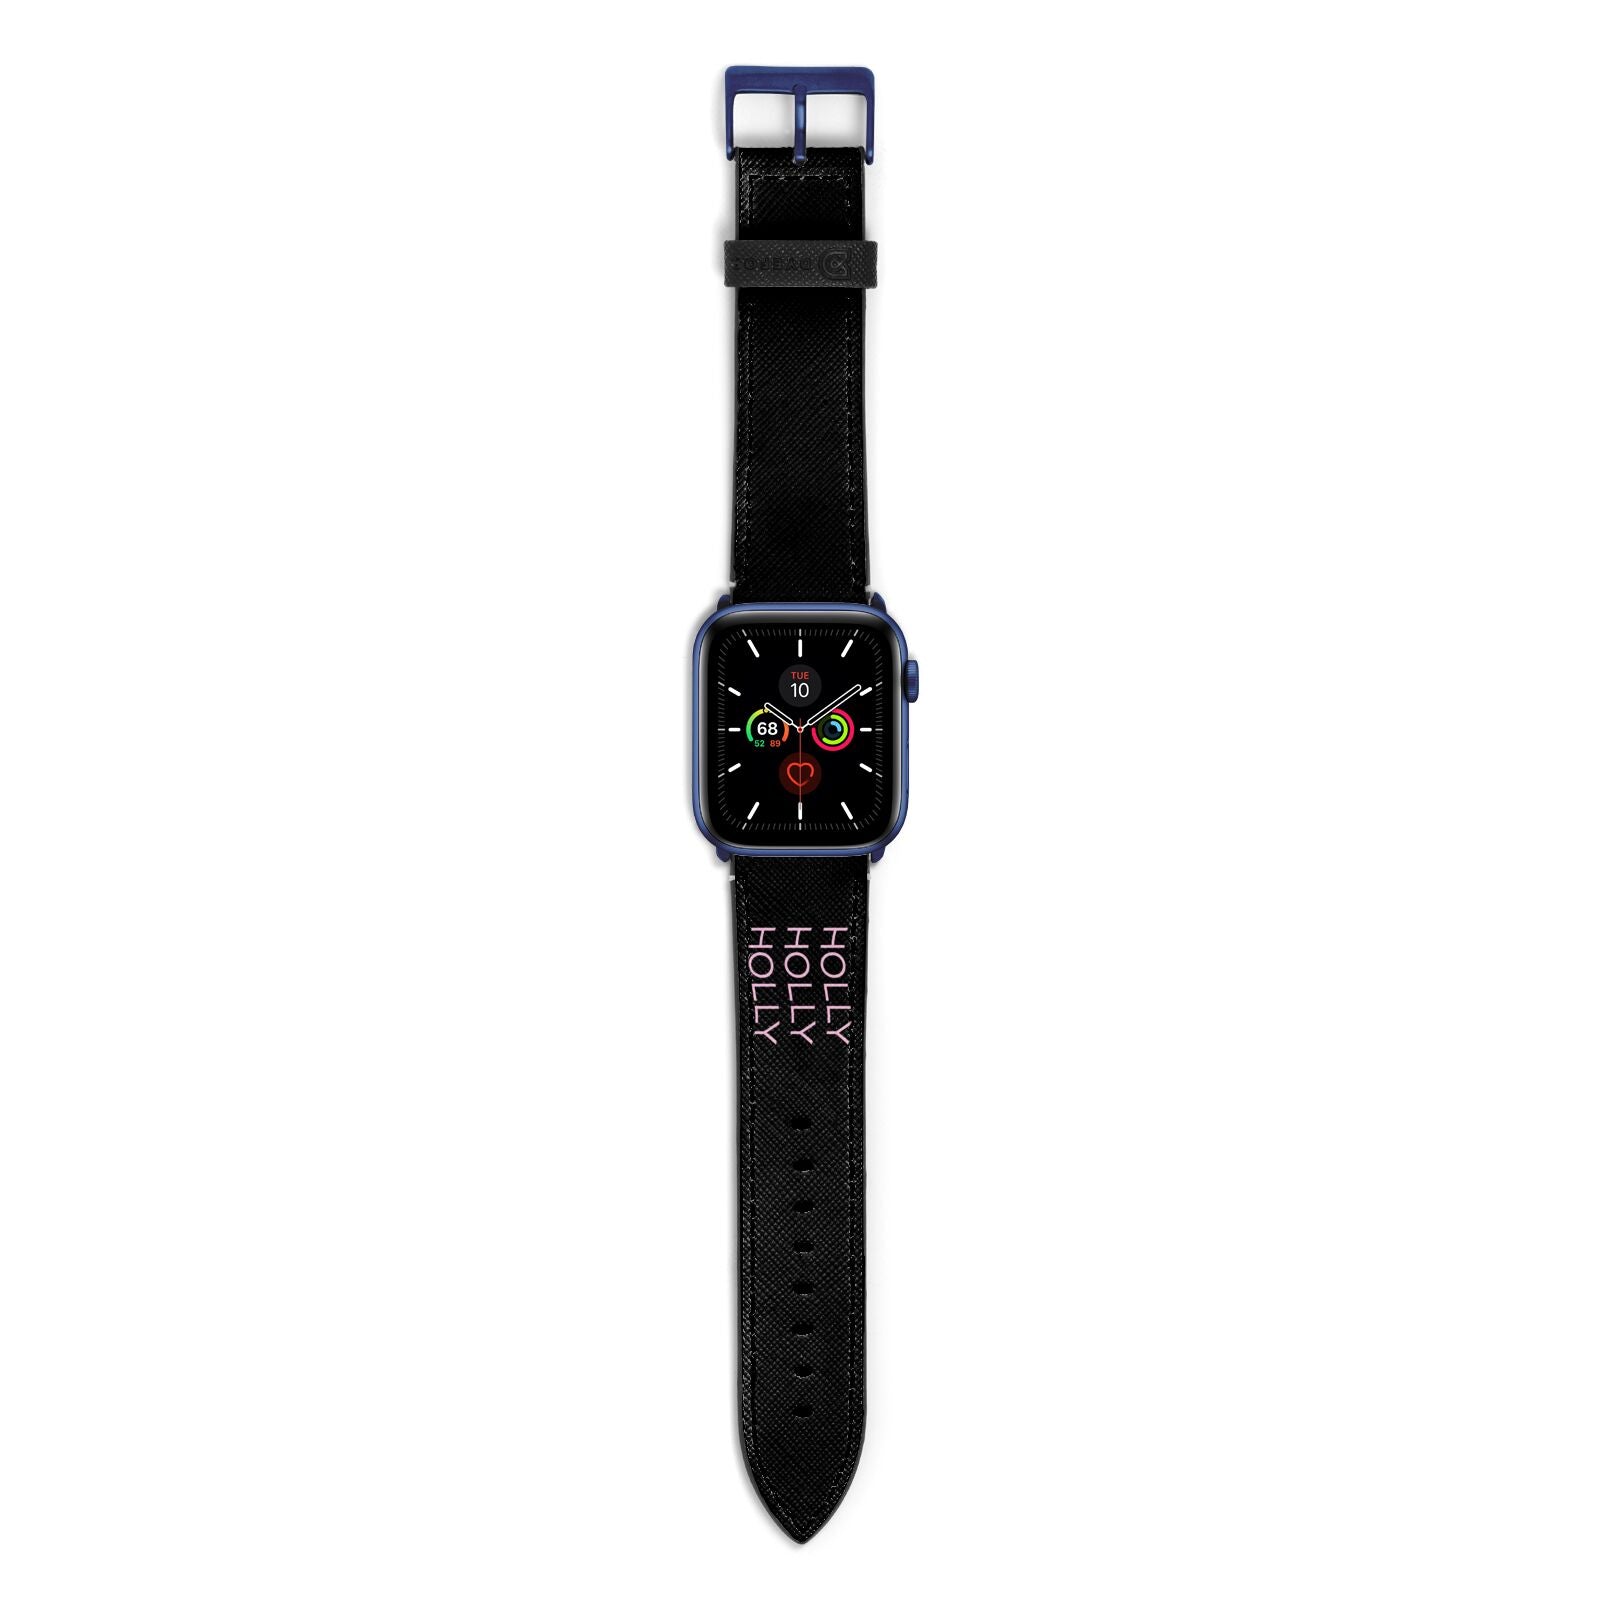 Wavy Name Apple Watch Strap with Blue Hardware